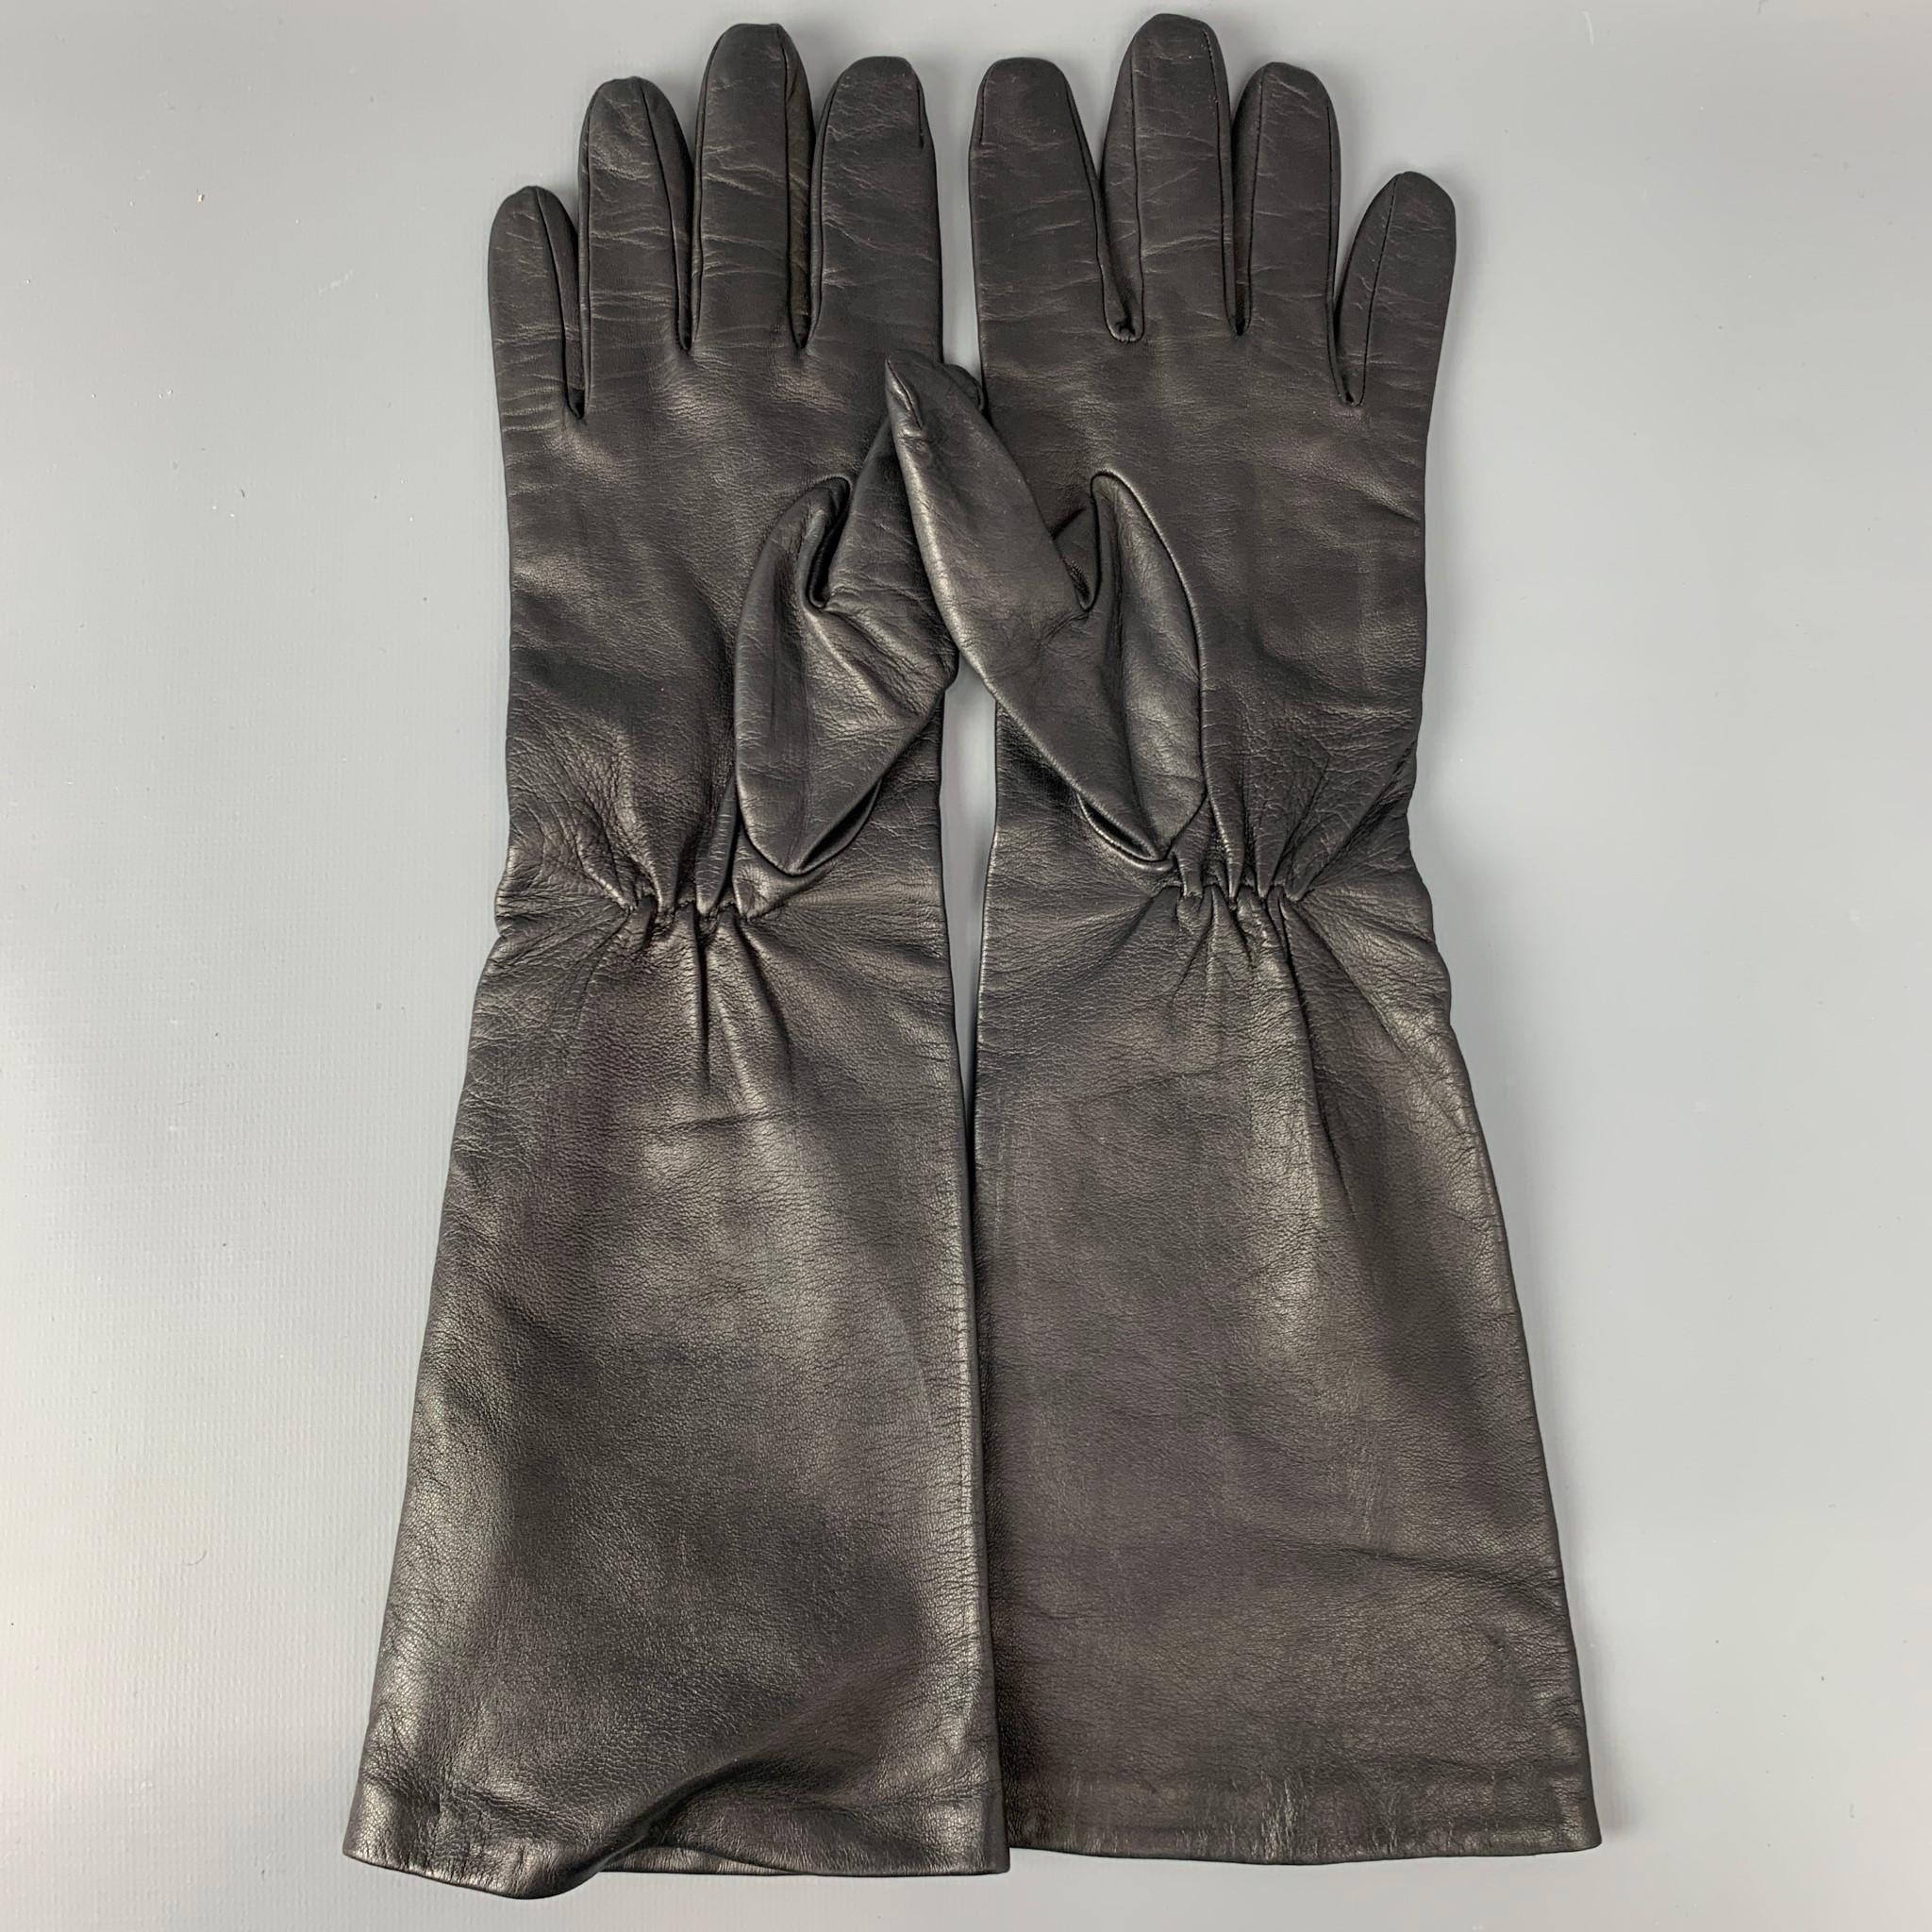 RALPH LAUREN long gloves comes in a black leather with a silk liner. Made in Italy.

Very Good Pre-Owned Condition.
Marked: 6 

Measurements:

Width: 5 in.
Length: 15 in. 